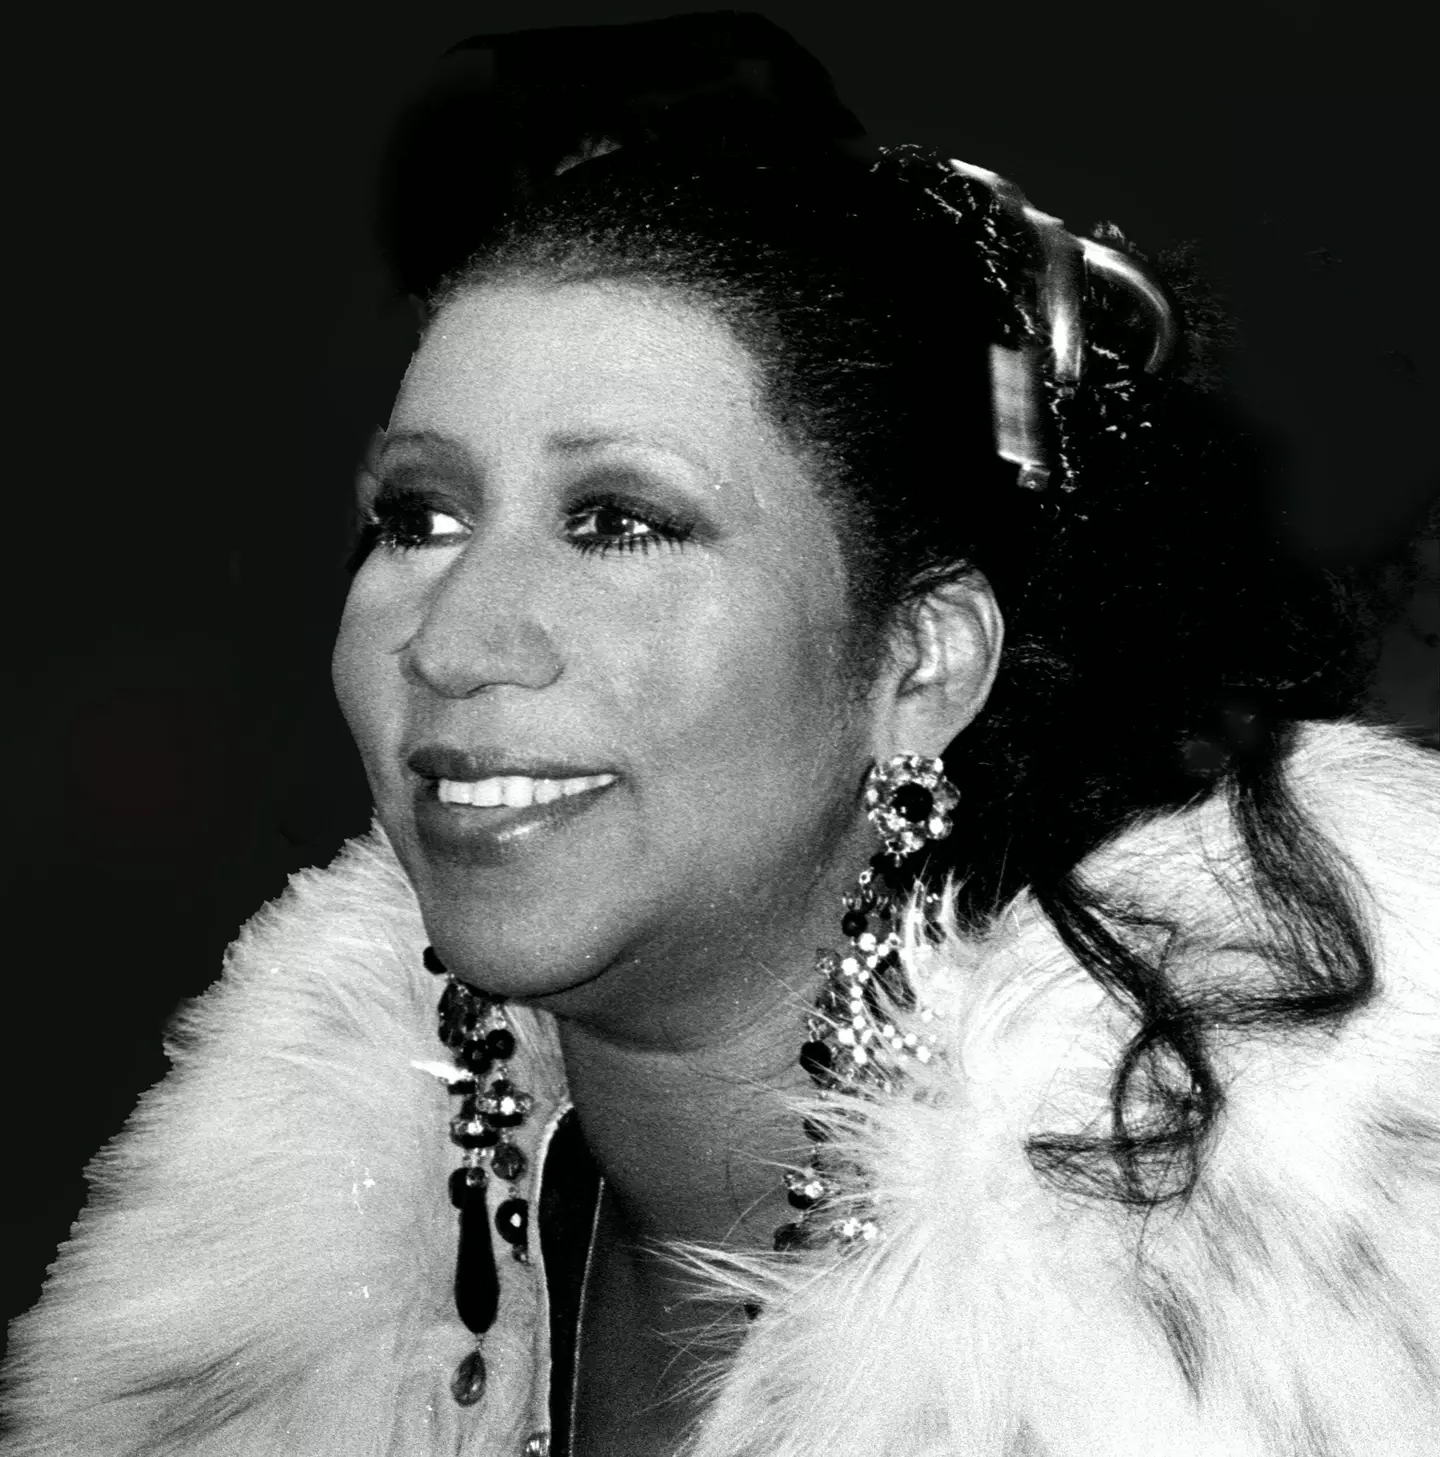 Aretha Franklin was followed for 40 years by the FBI.